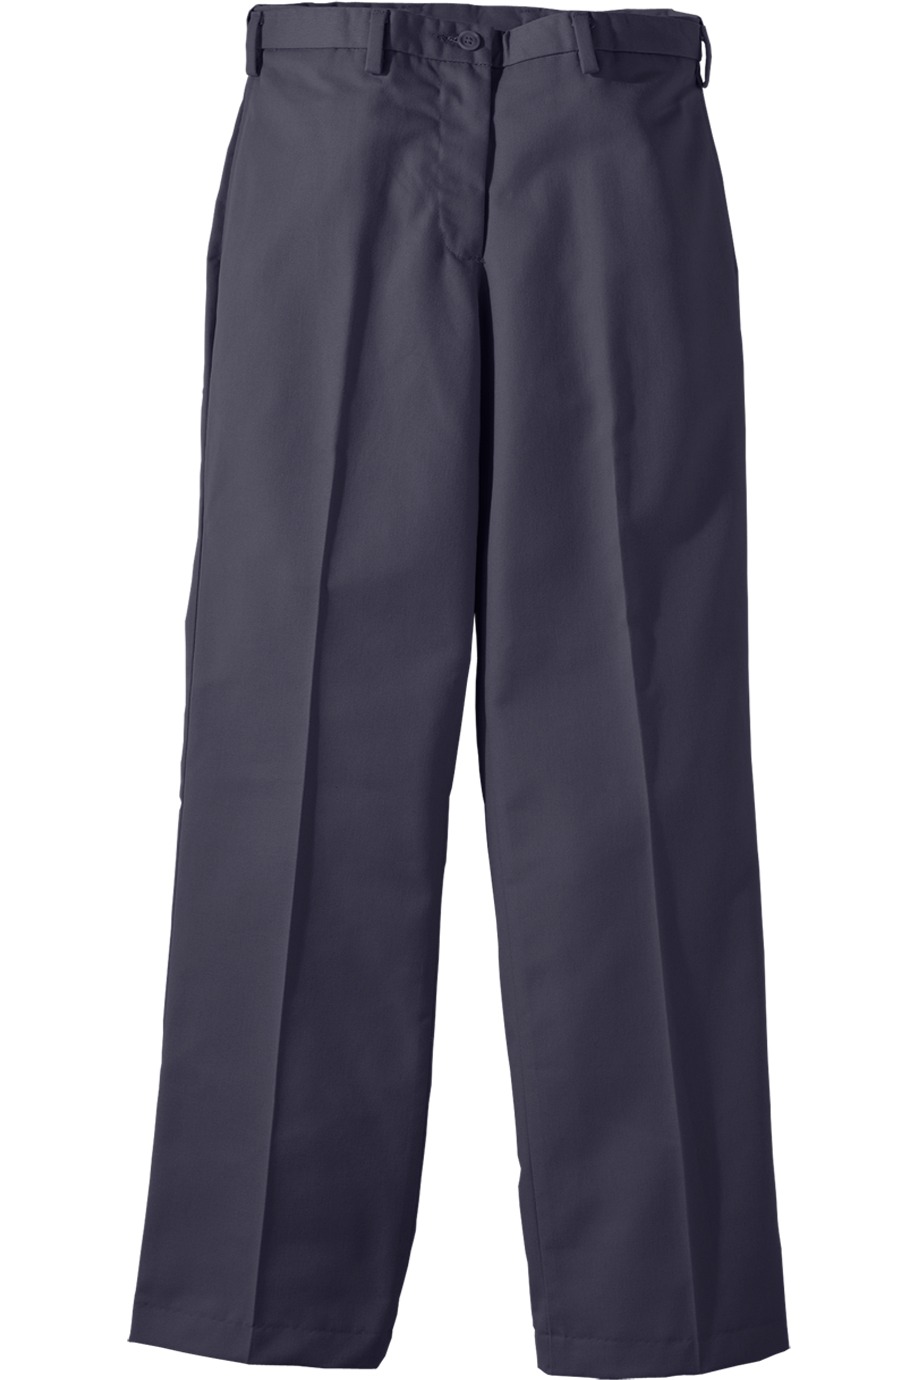 Edwards Garment 8576 - Women's Easy Fit Chino Flat Front Pant